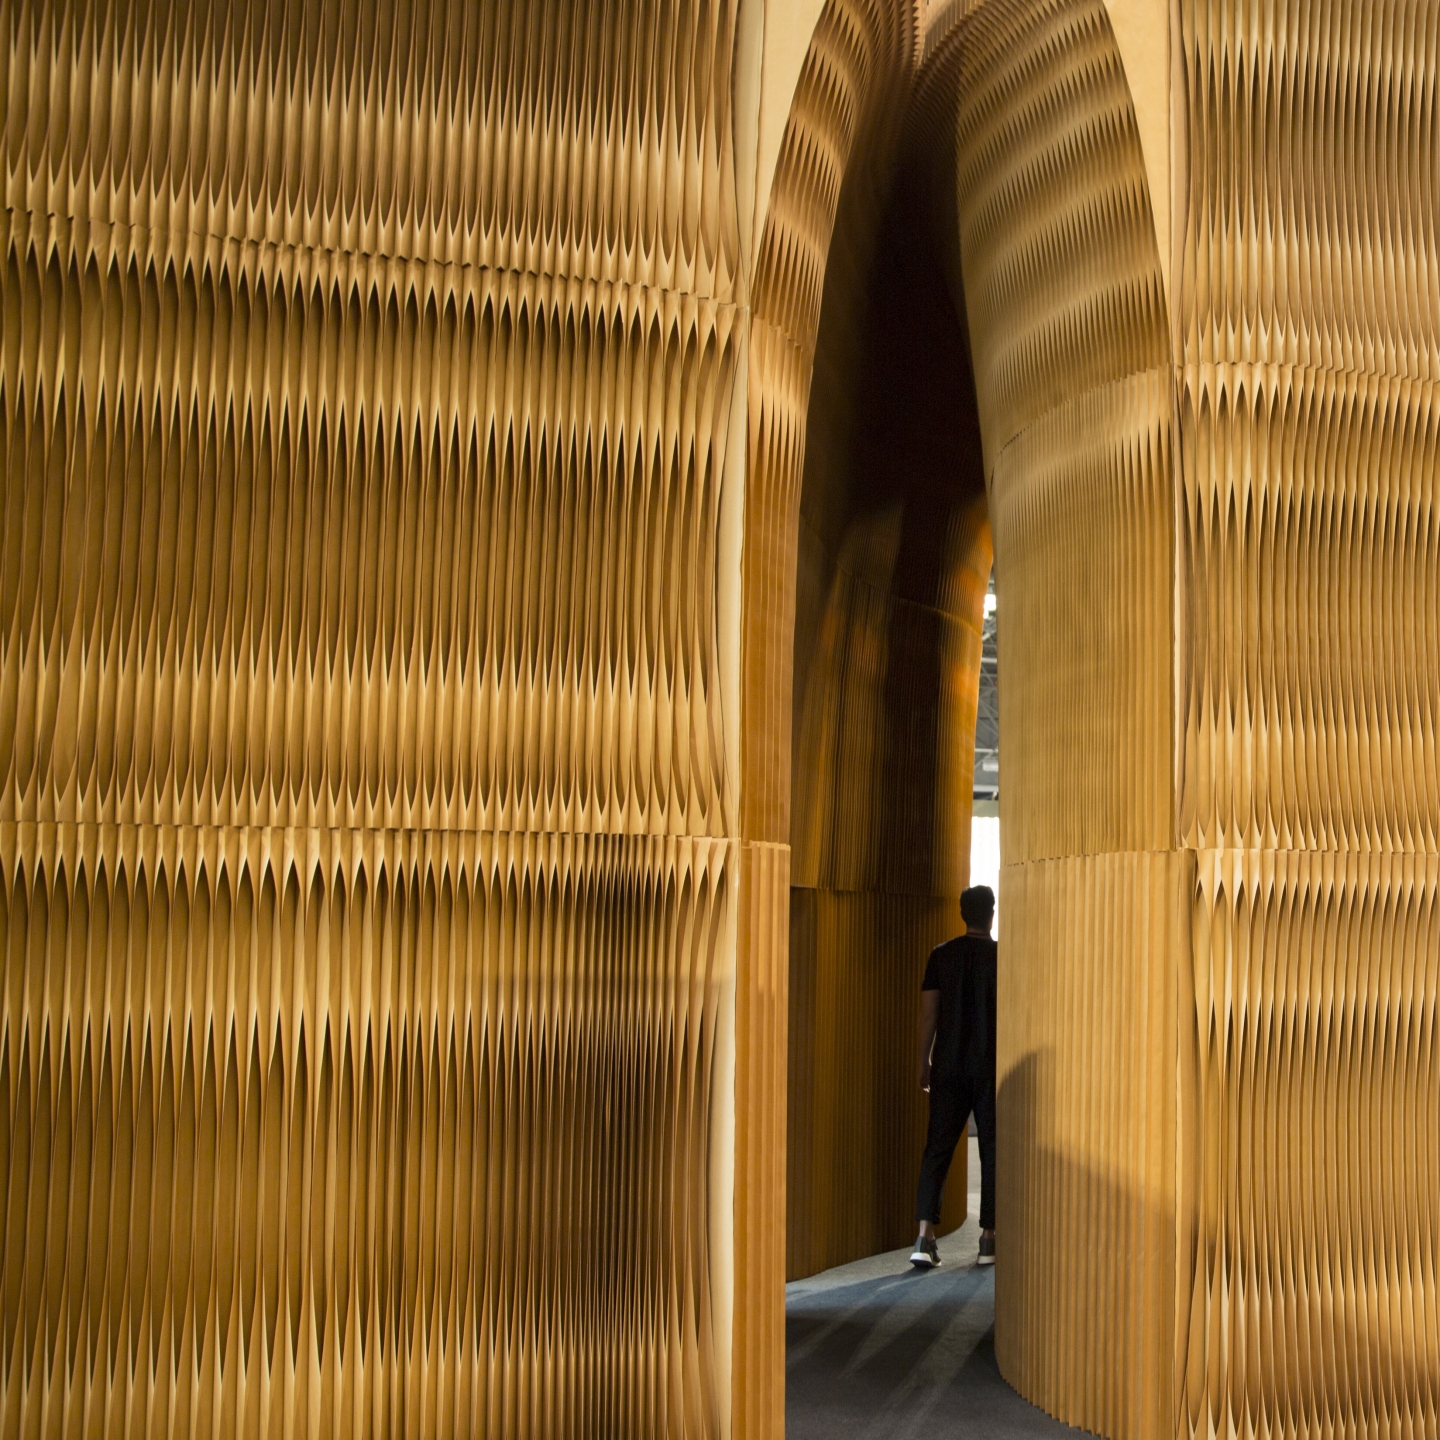 inspired by sea caves, a monolithic fissure made from softwalls wound through the ICFF installation - mobile folding partition walls